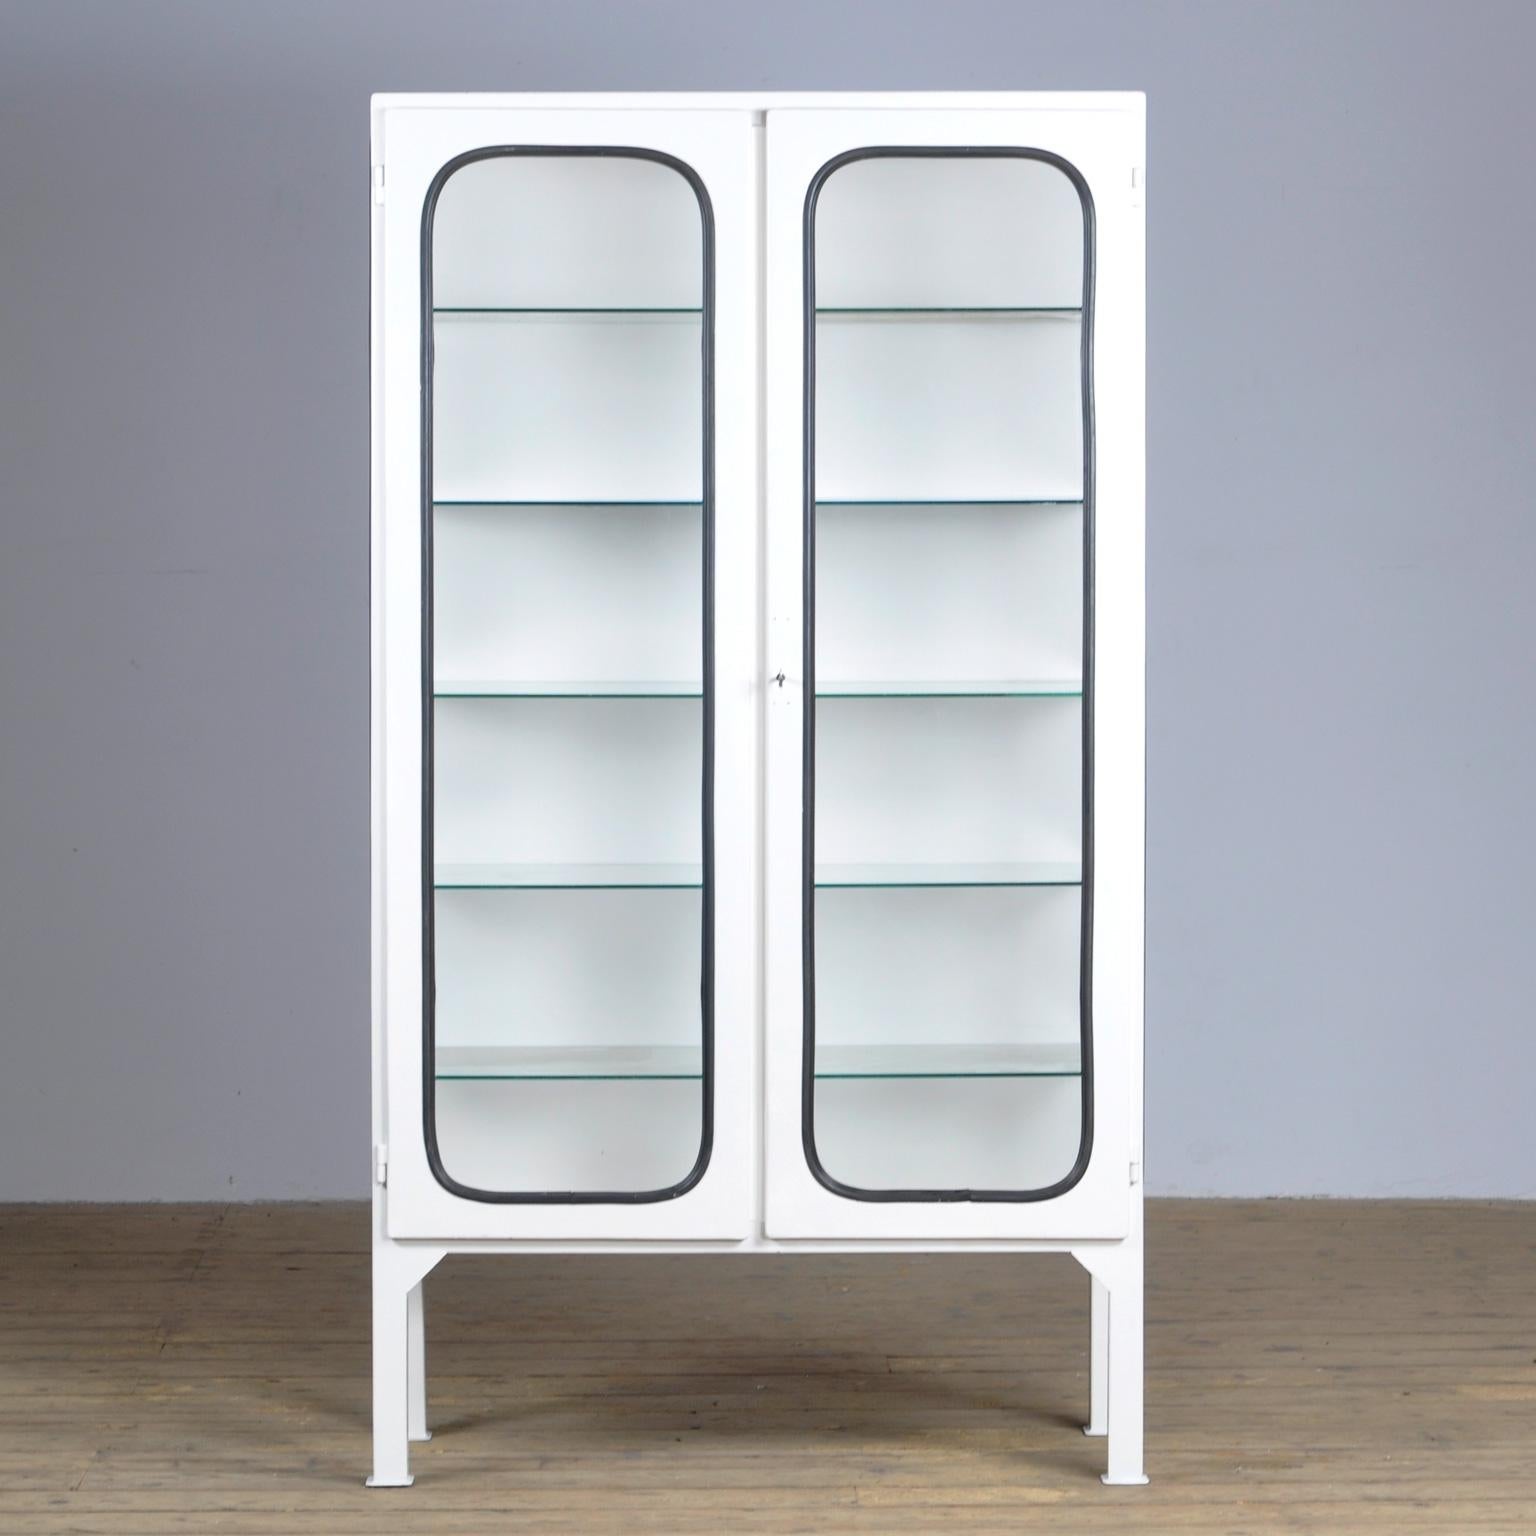 This medicine cabinet was designed in the 1970s and was produced circa 1975 in Hungary. It is made from iron and glass, and the glass is held by a black rubber strip. The cabinet features five adjustable glass shelves and a functioning lock.